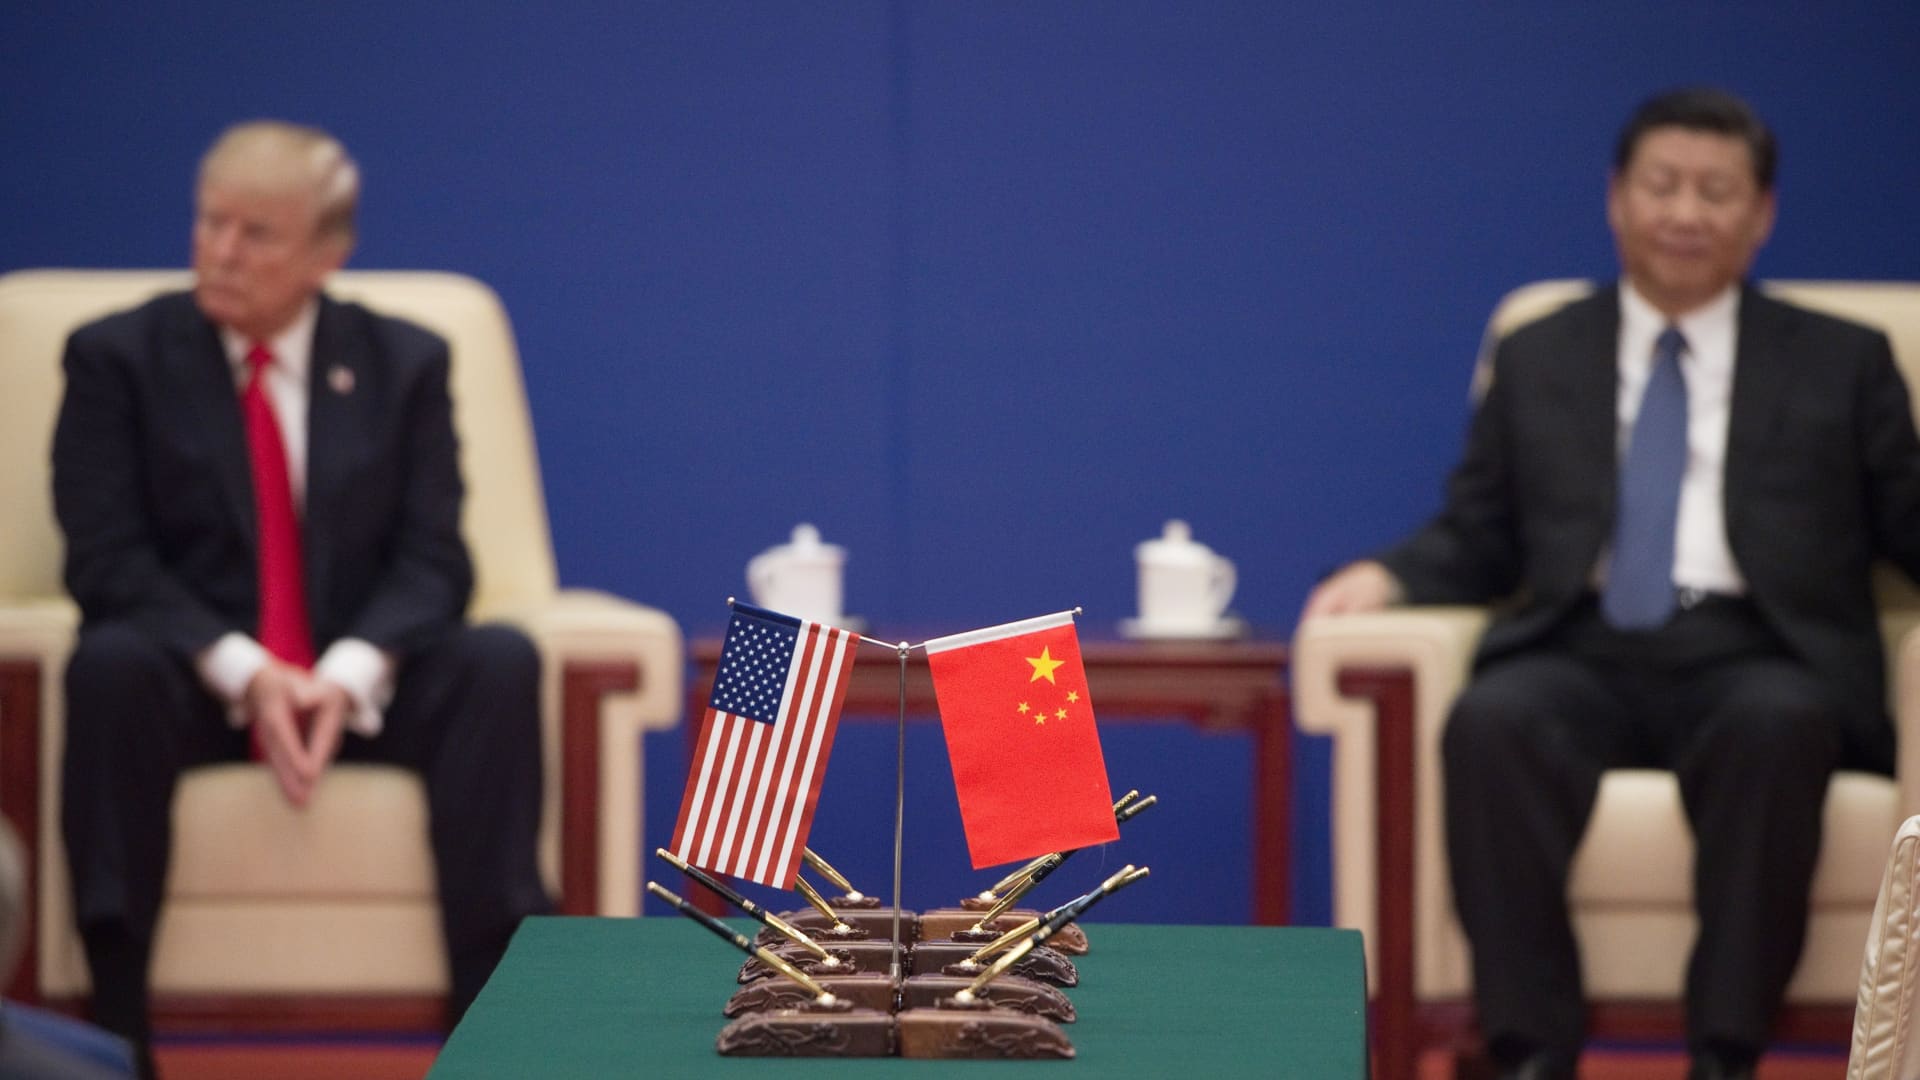 US President Donald Trump and China's President Xi Jinping attend a business leaders event inside the Great Hall of the People in Beijing on November 9, 2017.